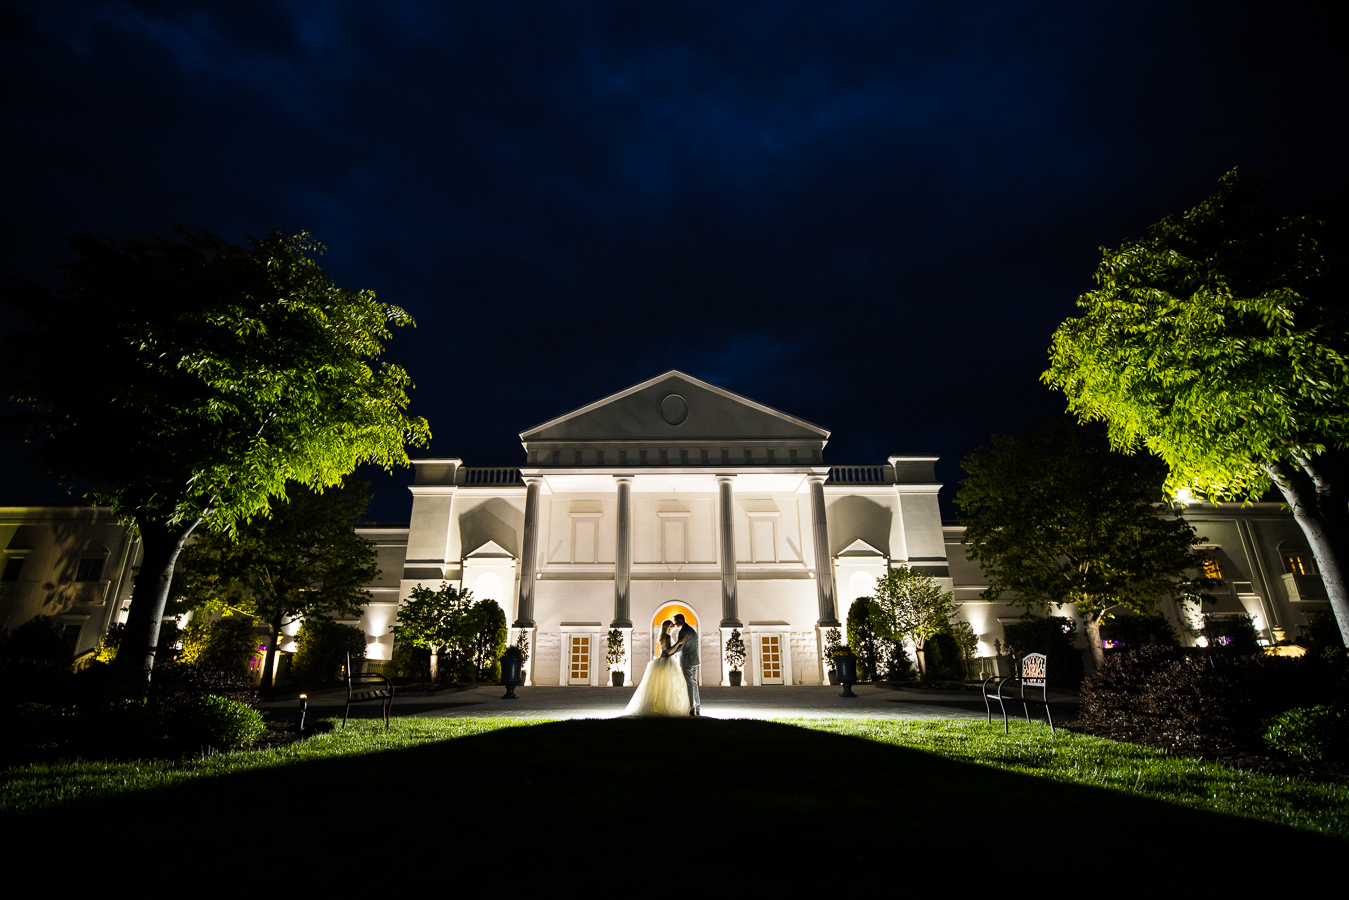 creative NJ Wedding Photographer, lisa rhinehart, captures this image of the bride and groom hugging one another for their end of the night shot as they stand in front of the palace for this unique image 